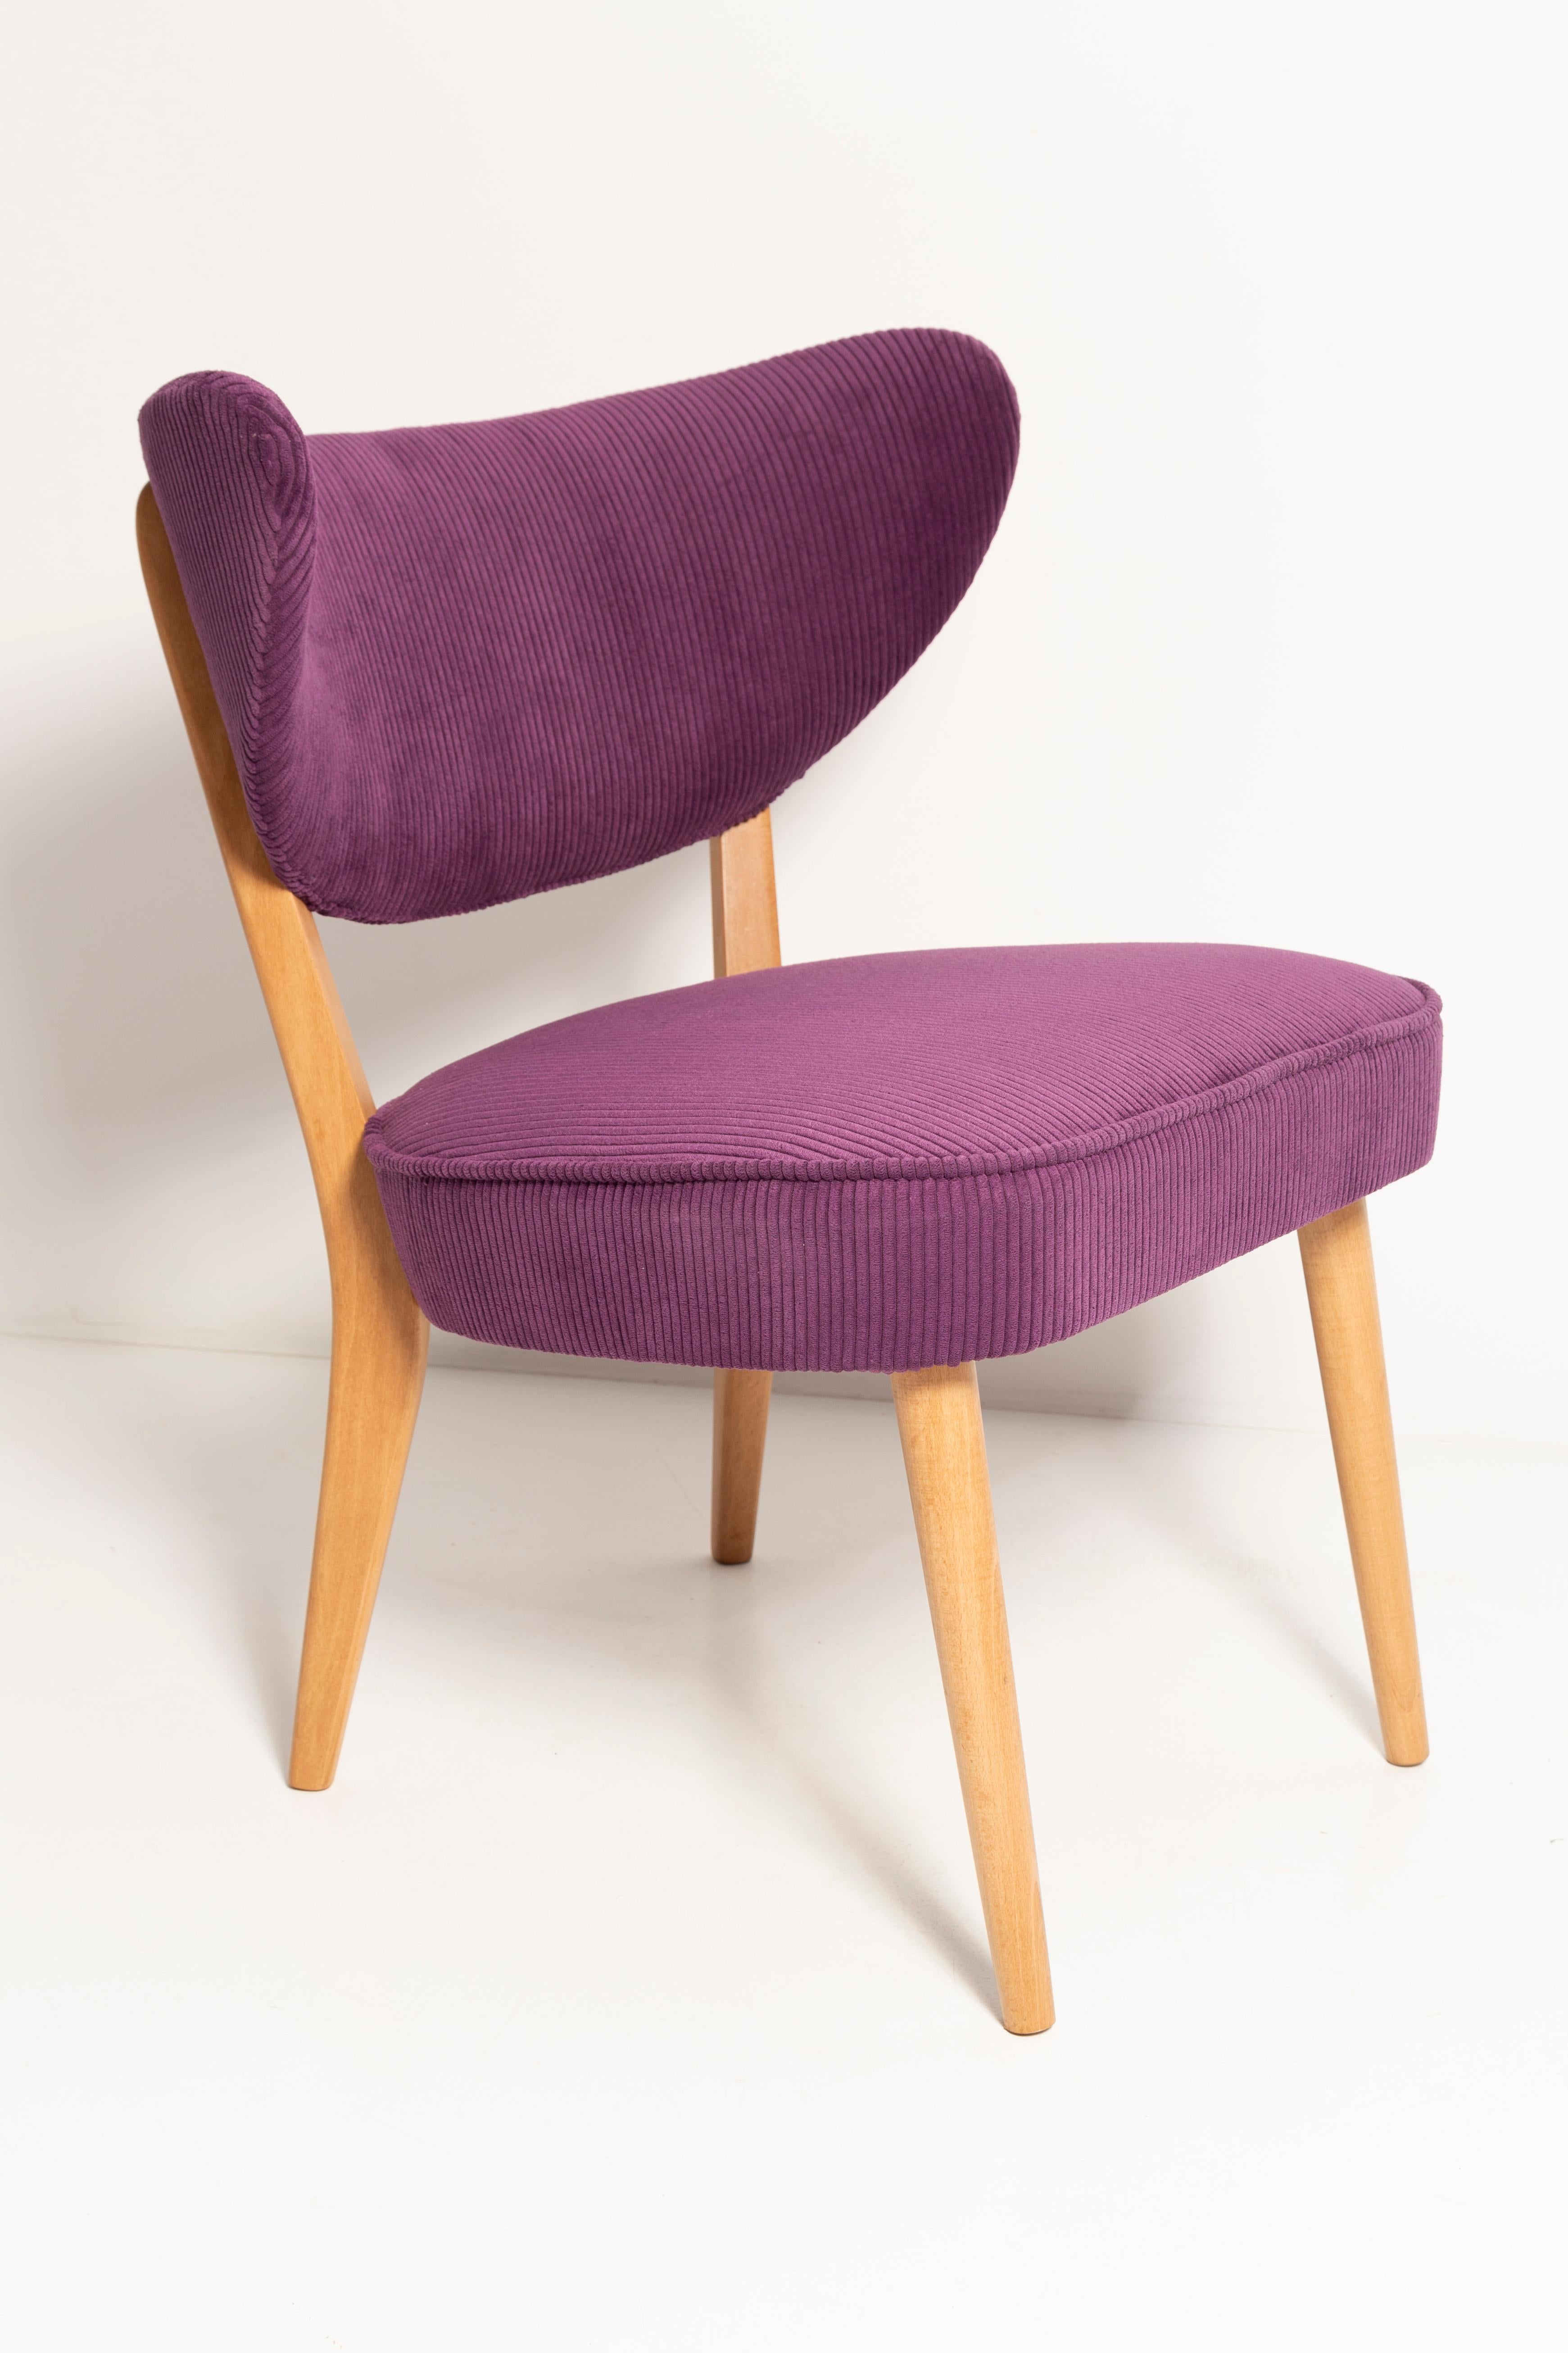 Hand-Crafted Midcentury Style Violet Velvet Club Chair, by Vintola Studio, Europe, Poland For Sale